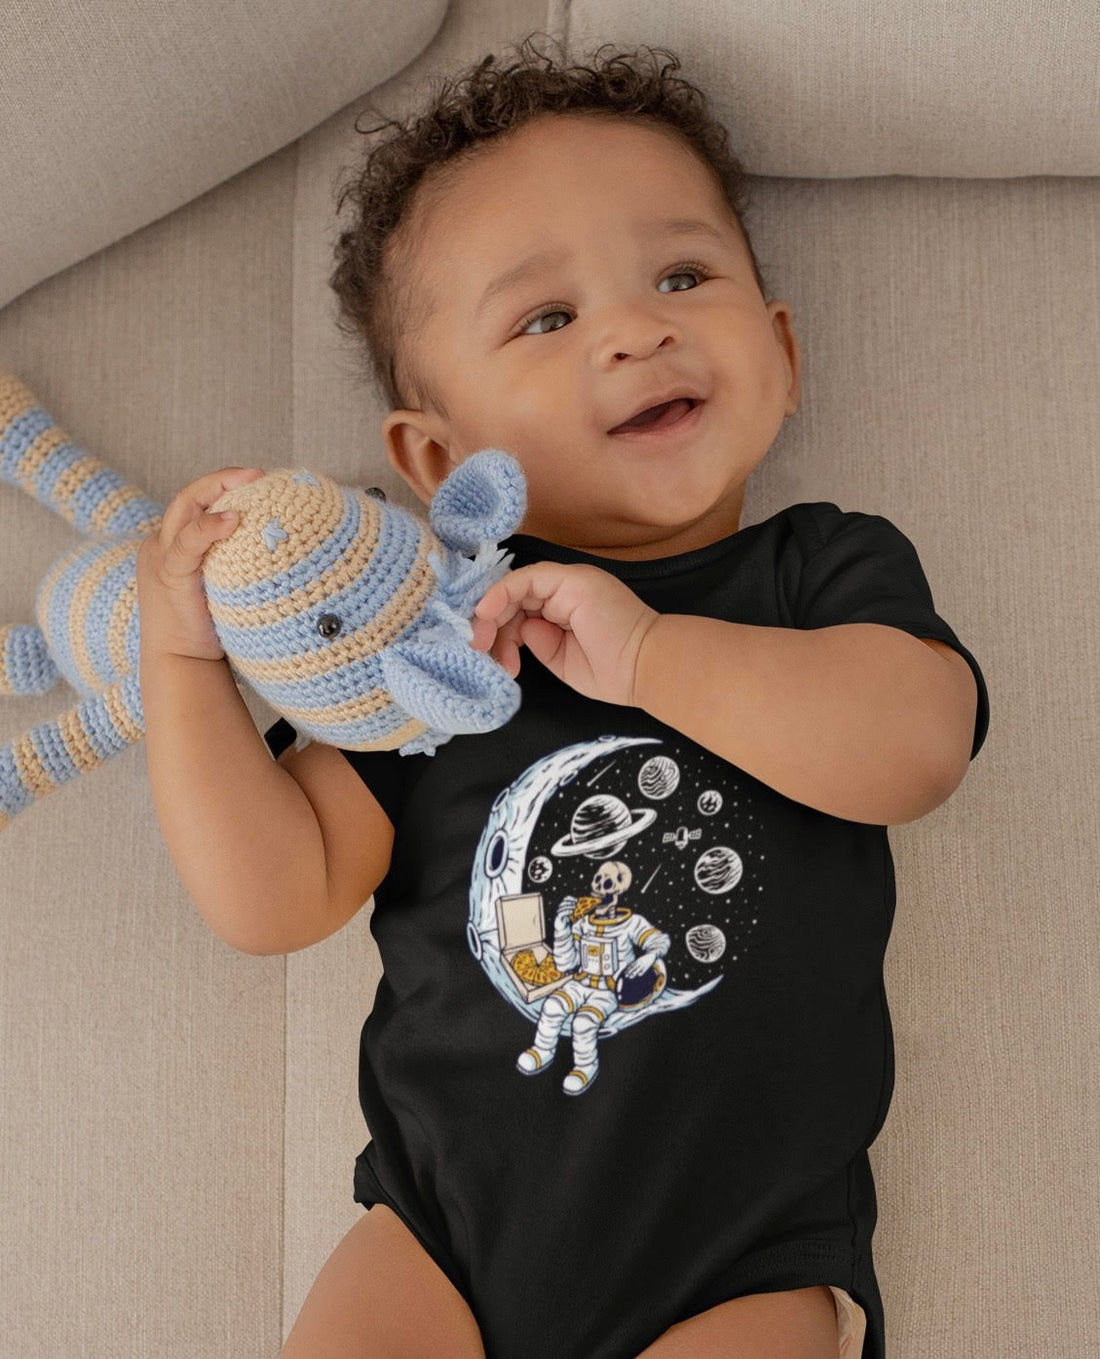 95% Organic Cotton, and 5% Spandex for Baby Clothing. – Naughty Baby  Clothing